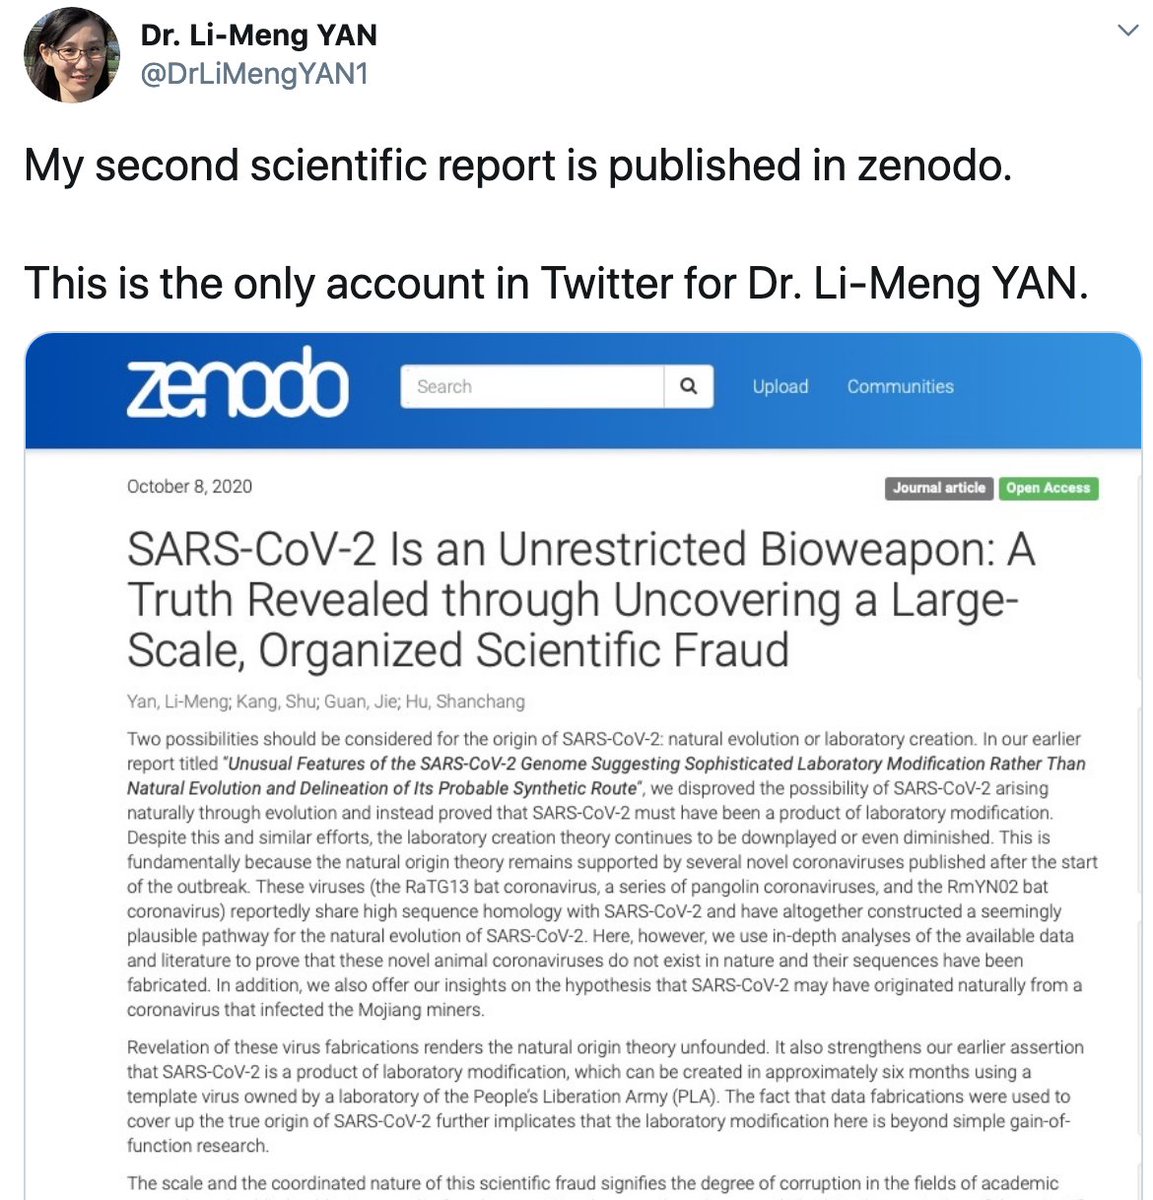 Getting in front of this now. Dr. Yan Li-Meng just dropped a new Steve Bannon-sponsored preprint on the origins of  #SARSCoV2 and...guess what it's about: